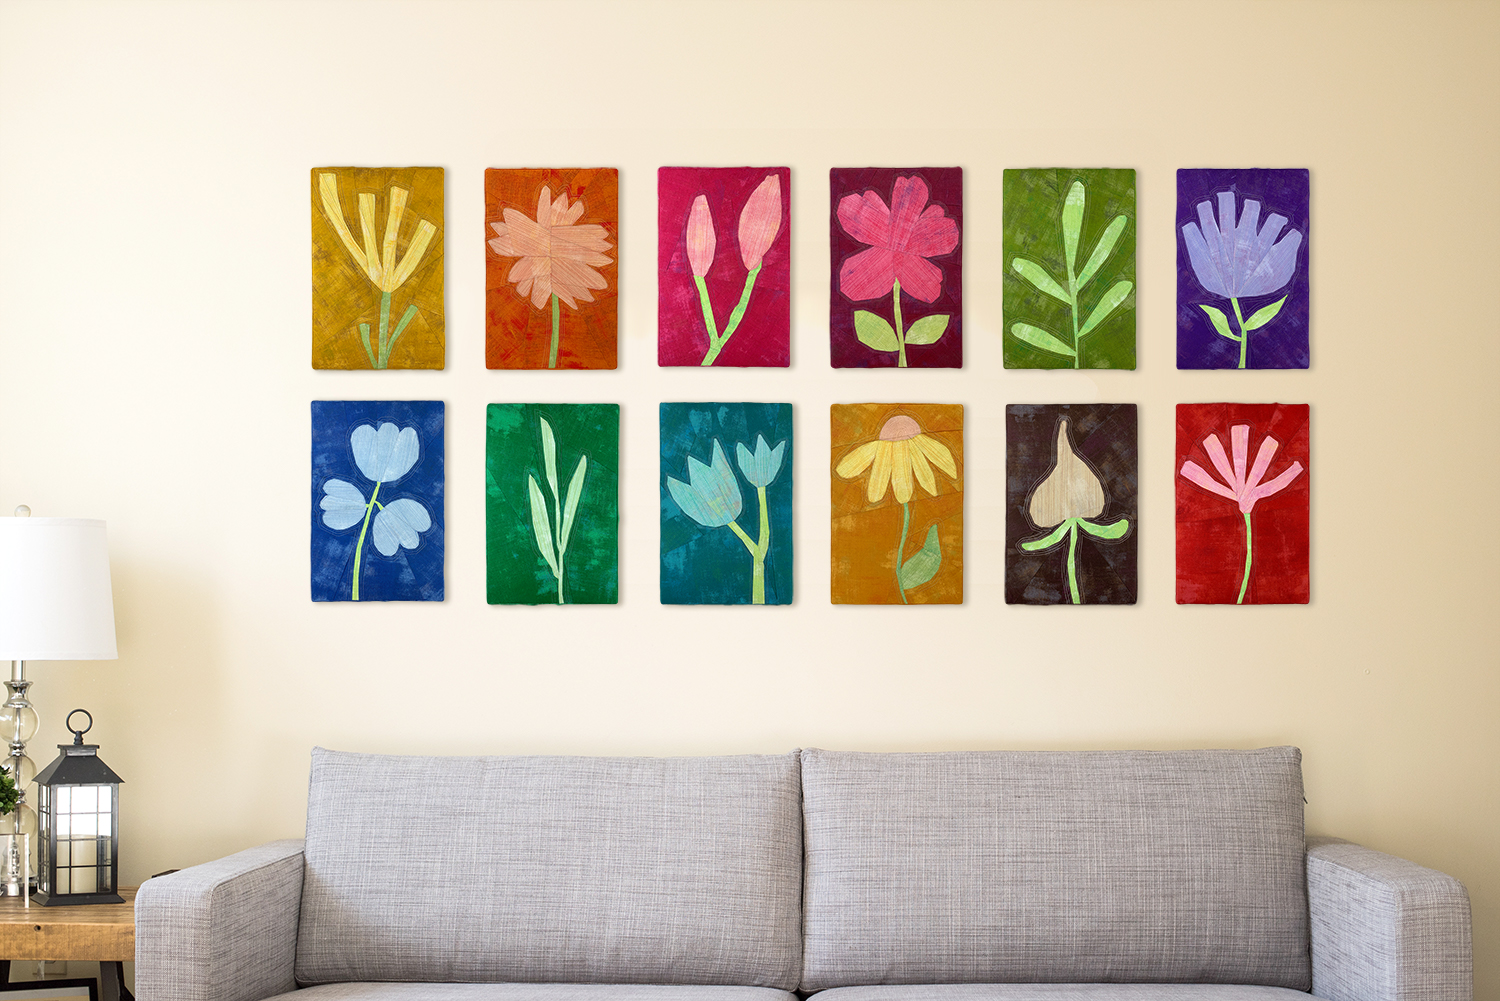 12 colorful floral quilted art pieces stretched over frames.